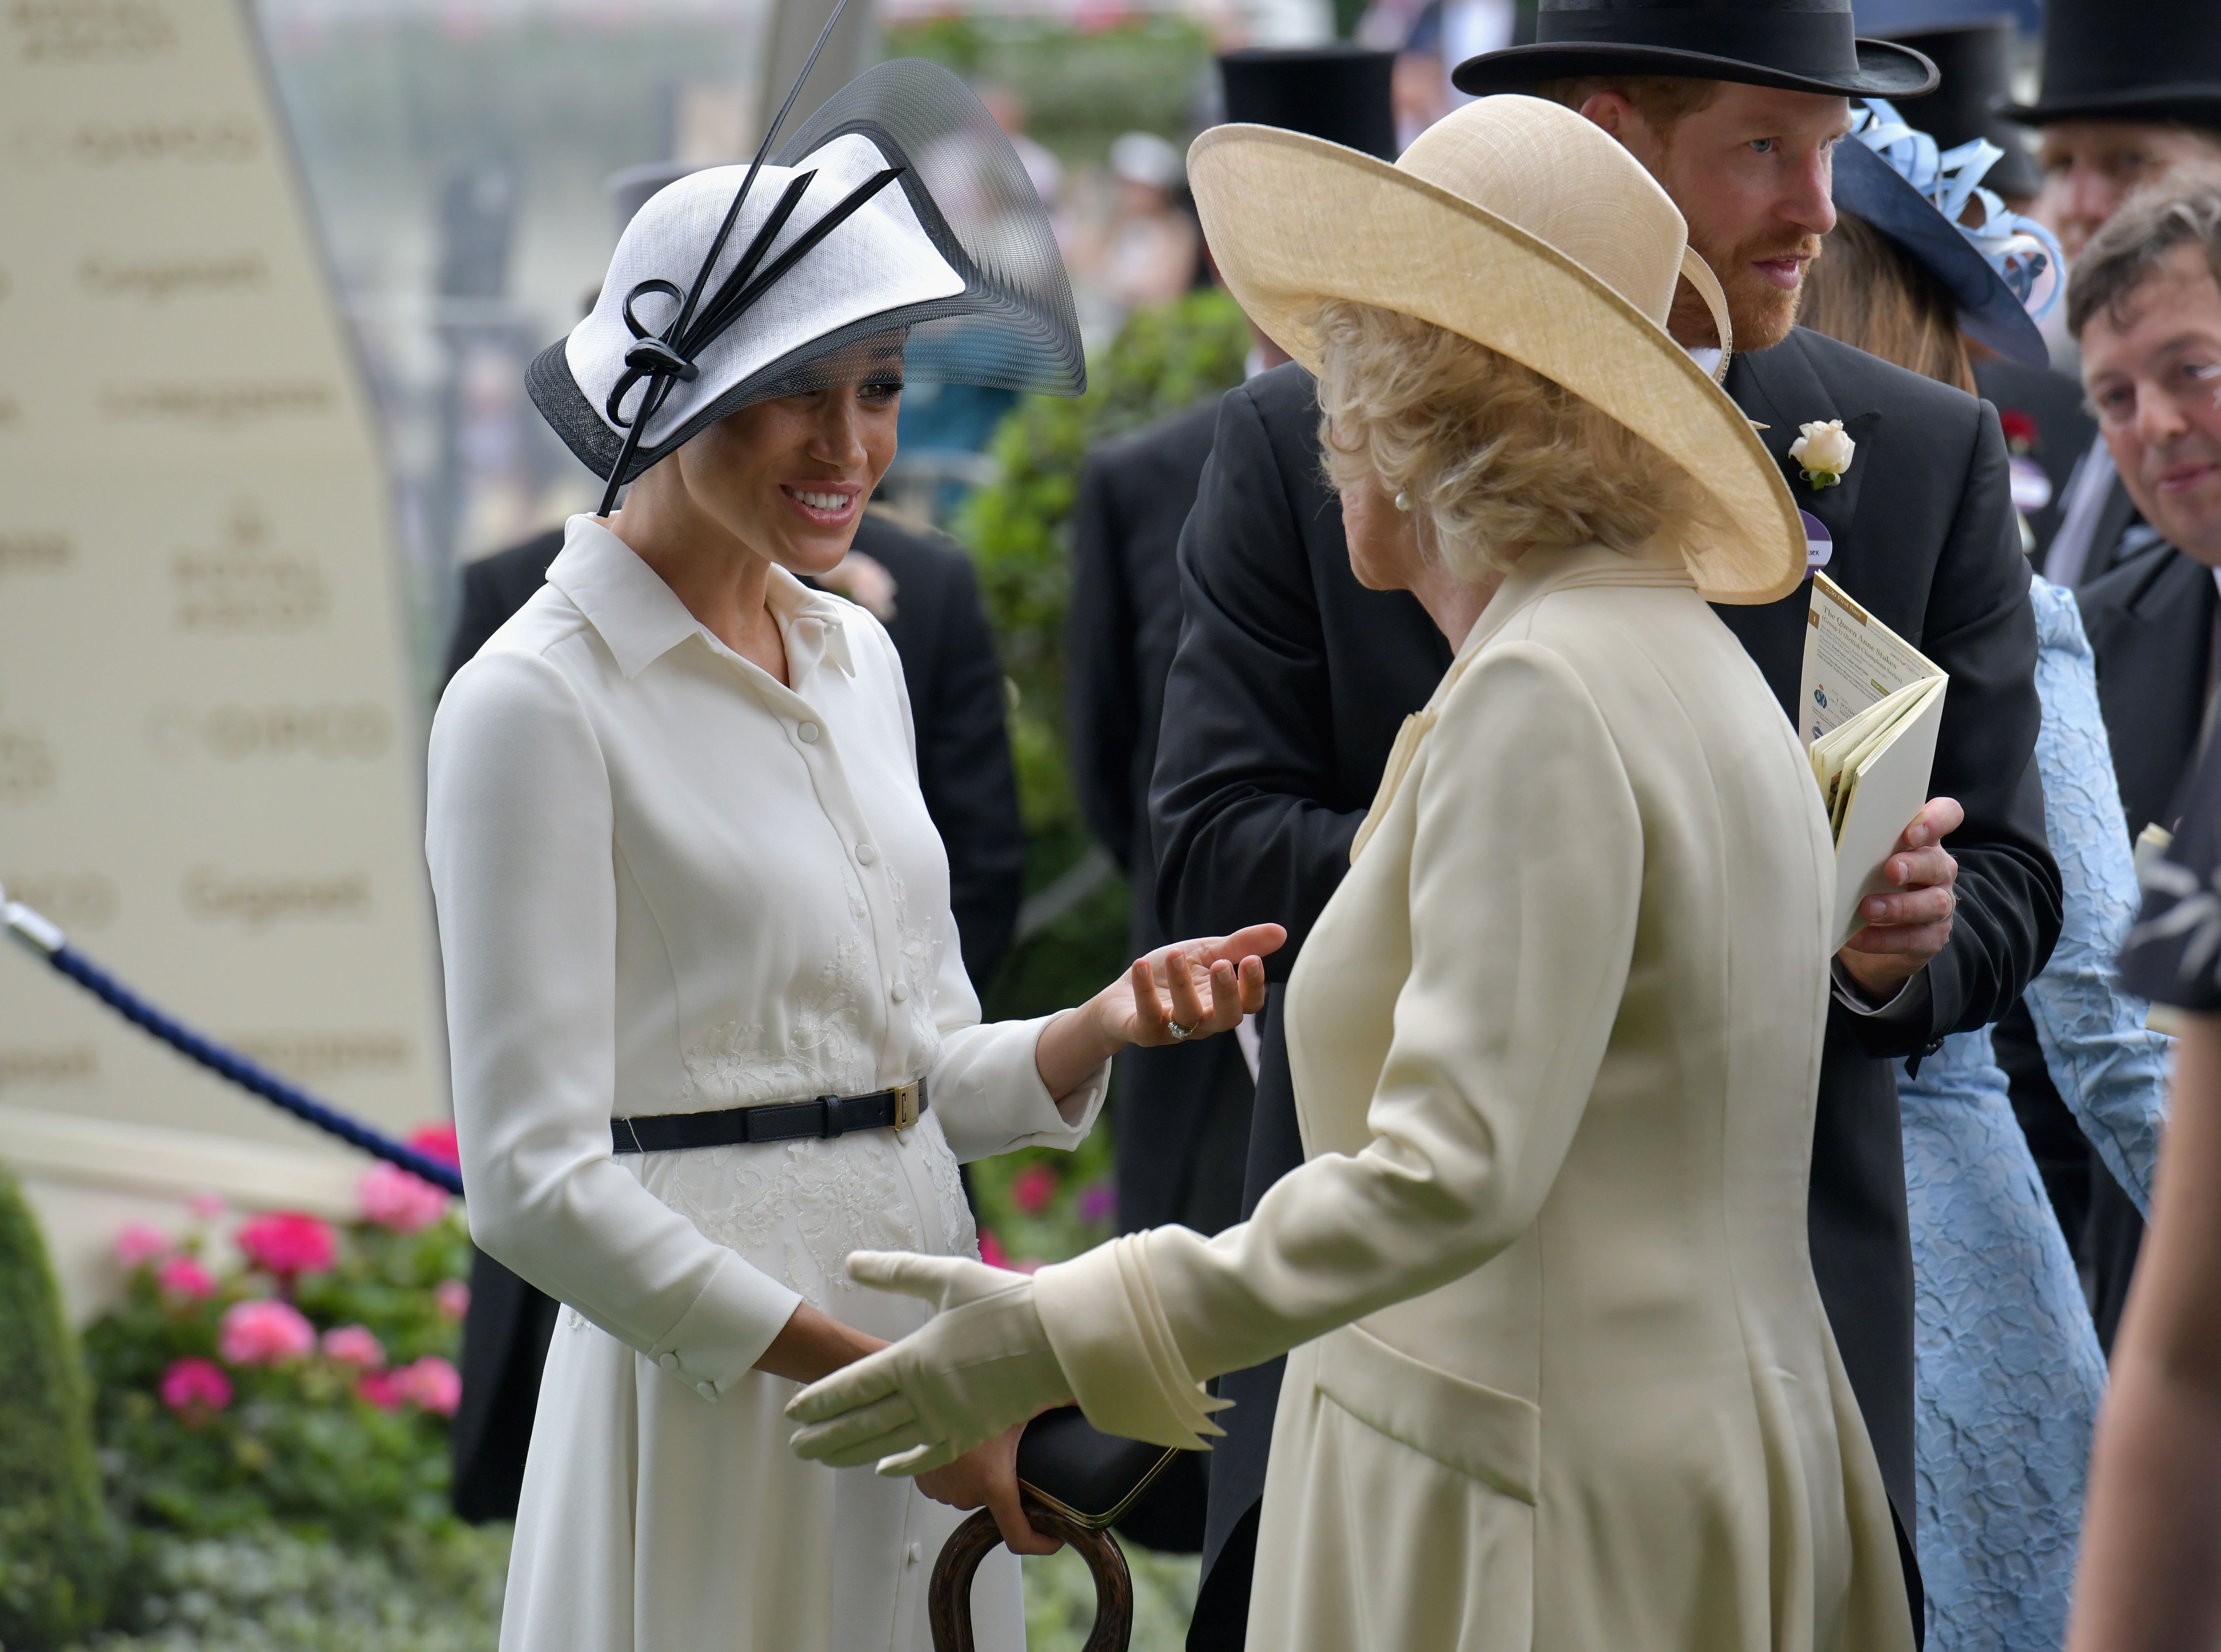 Duchess Meghan, Duchess Camilla, and Prince Harry at Royal Ascot Racecourse on June 19, 2018, in Ascot, England. | Source: Kirstin Sinclair/Getty Images